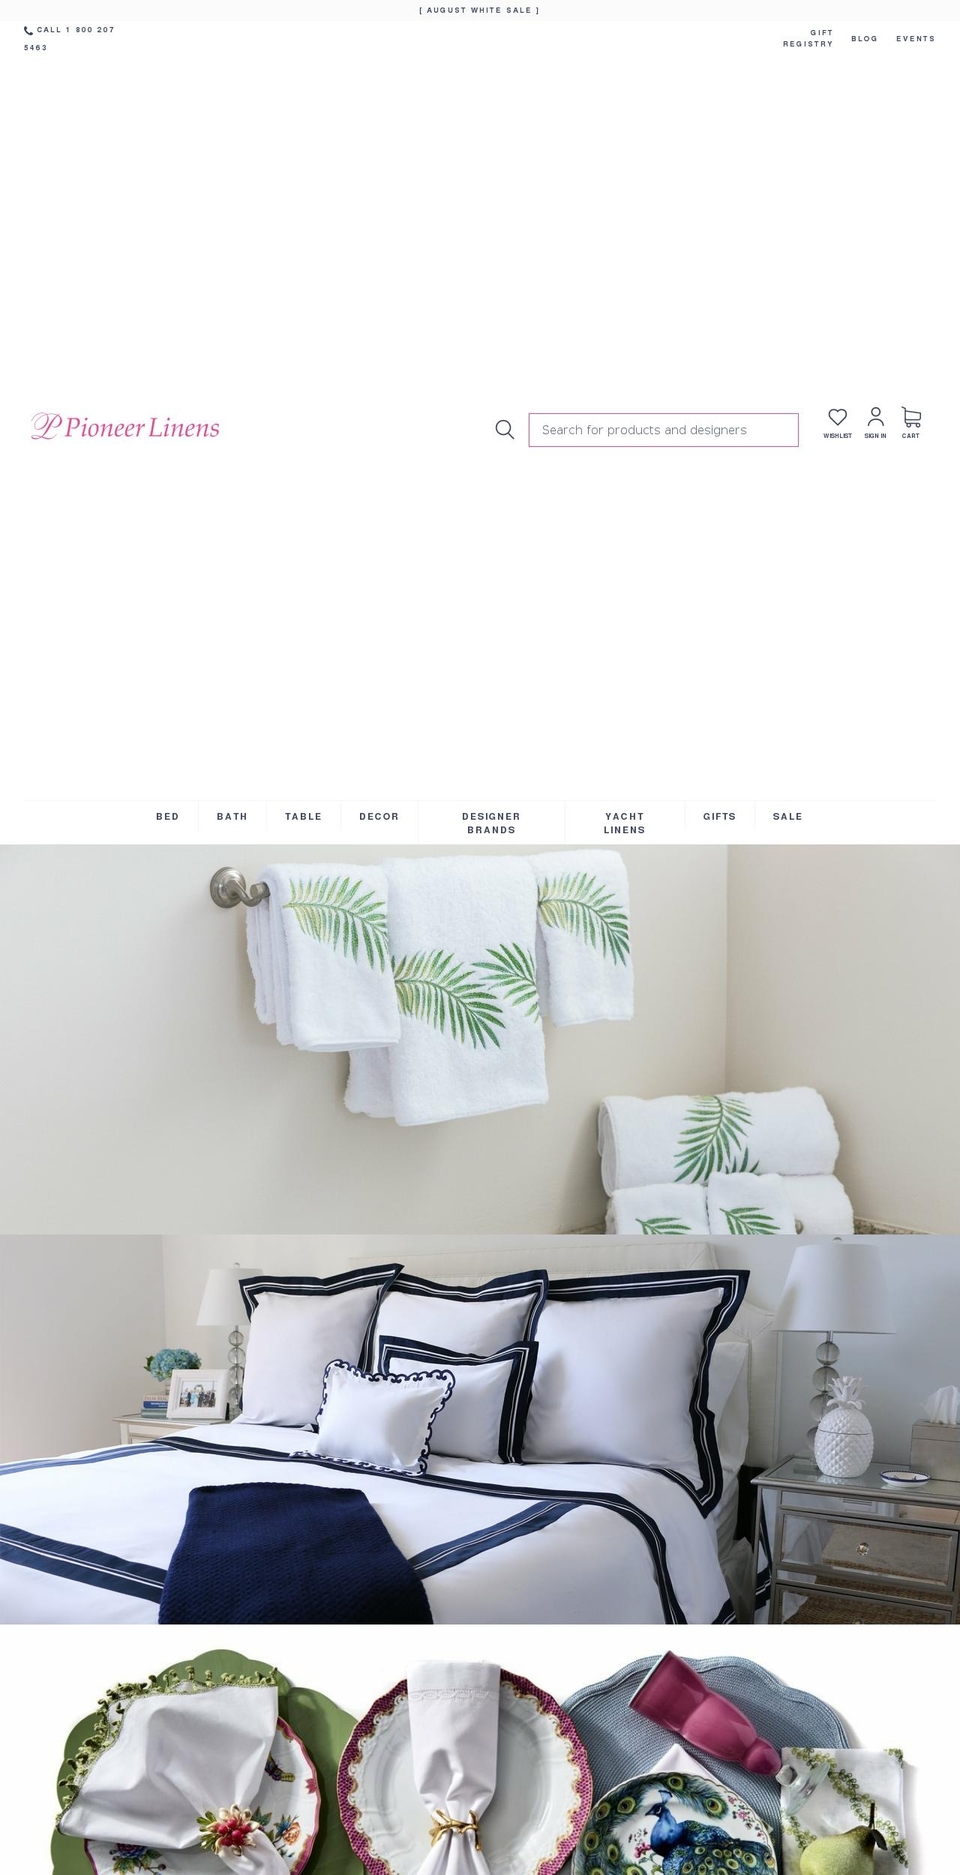 Buko Shopify Theme - Products Consolidation Shopify theme site example mpioneerlinen.us